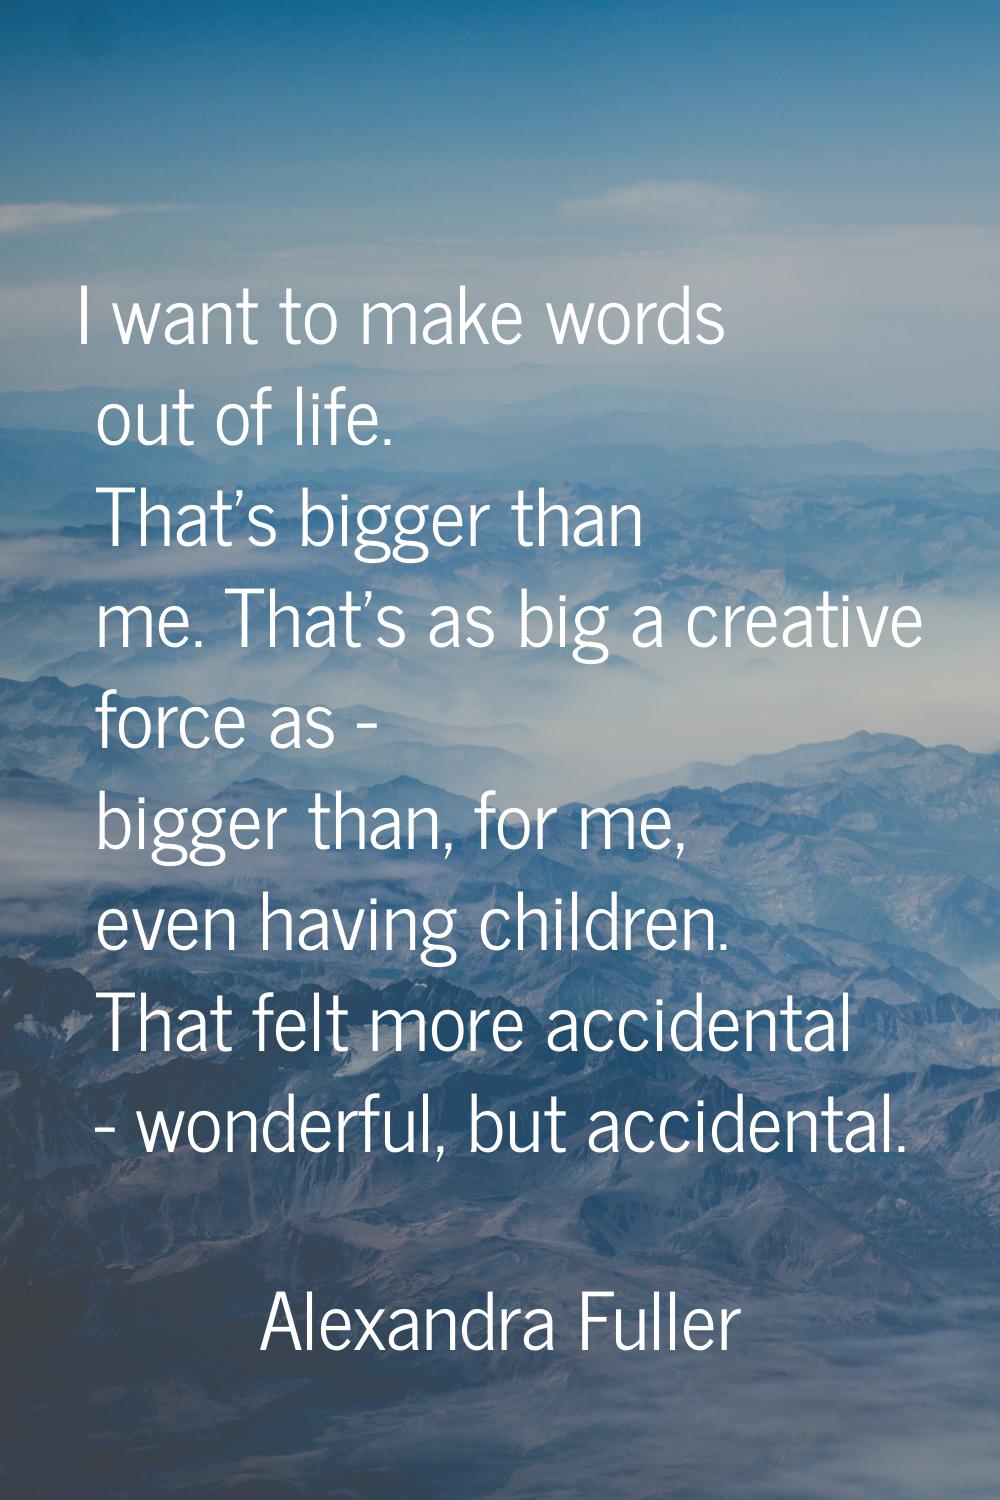 I want to make words out of life. That's bigger than me. That's as big a creative force as - bigger